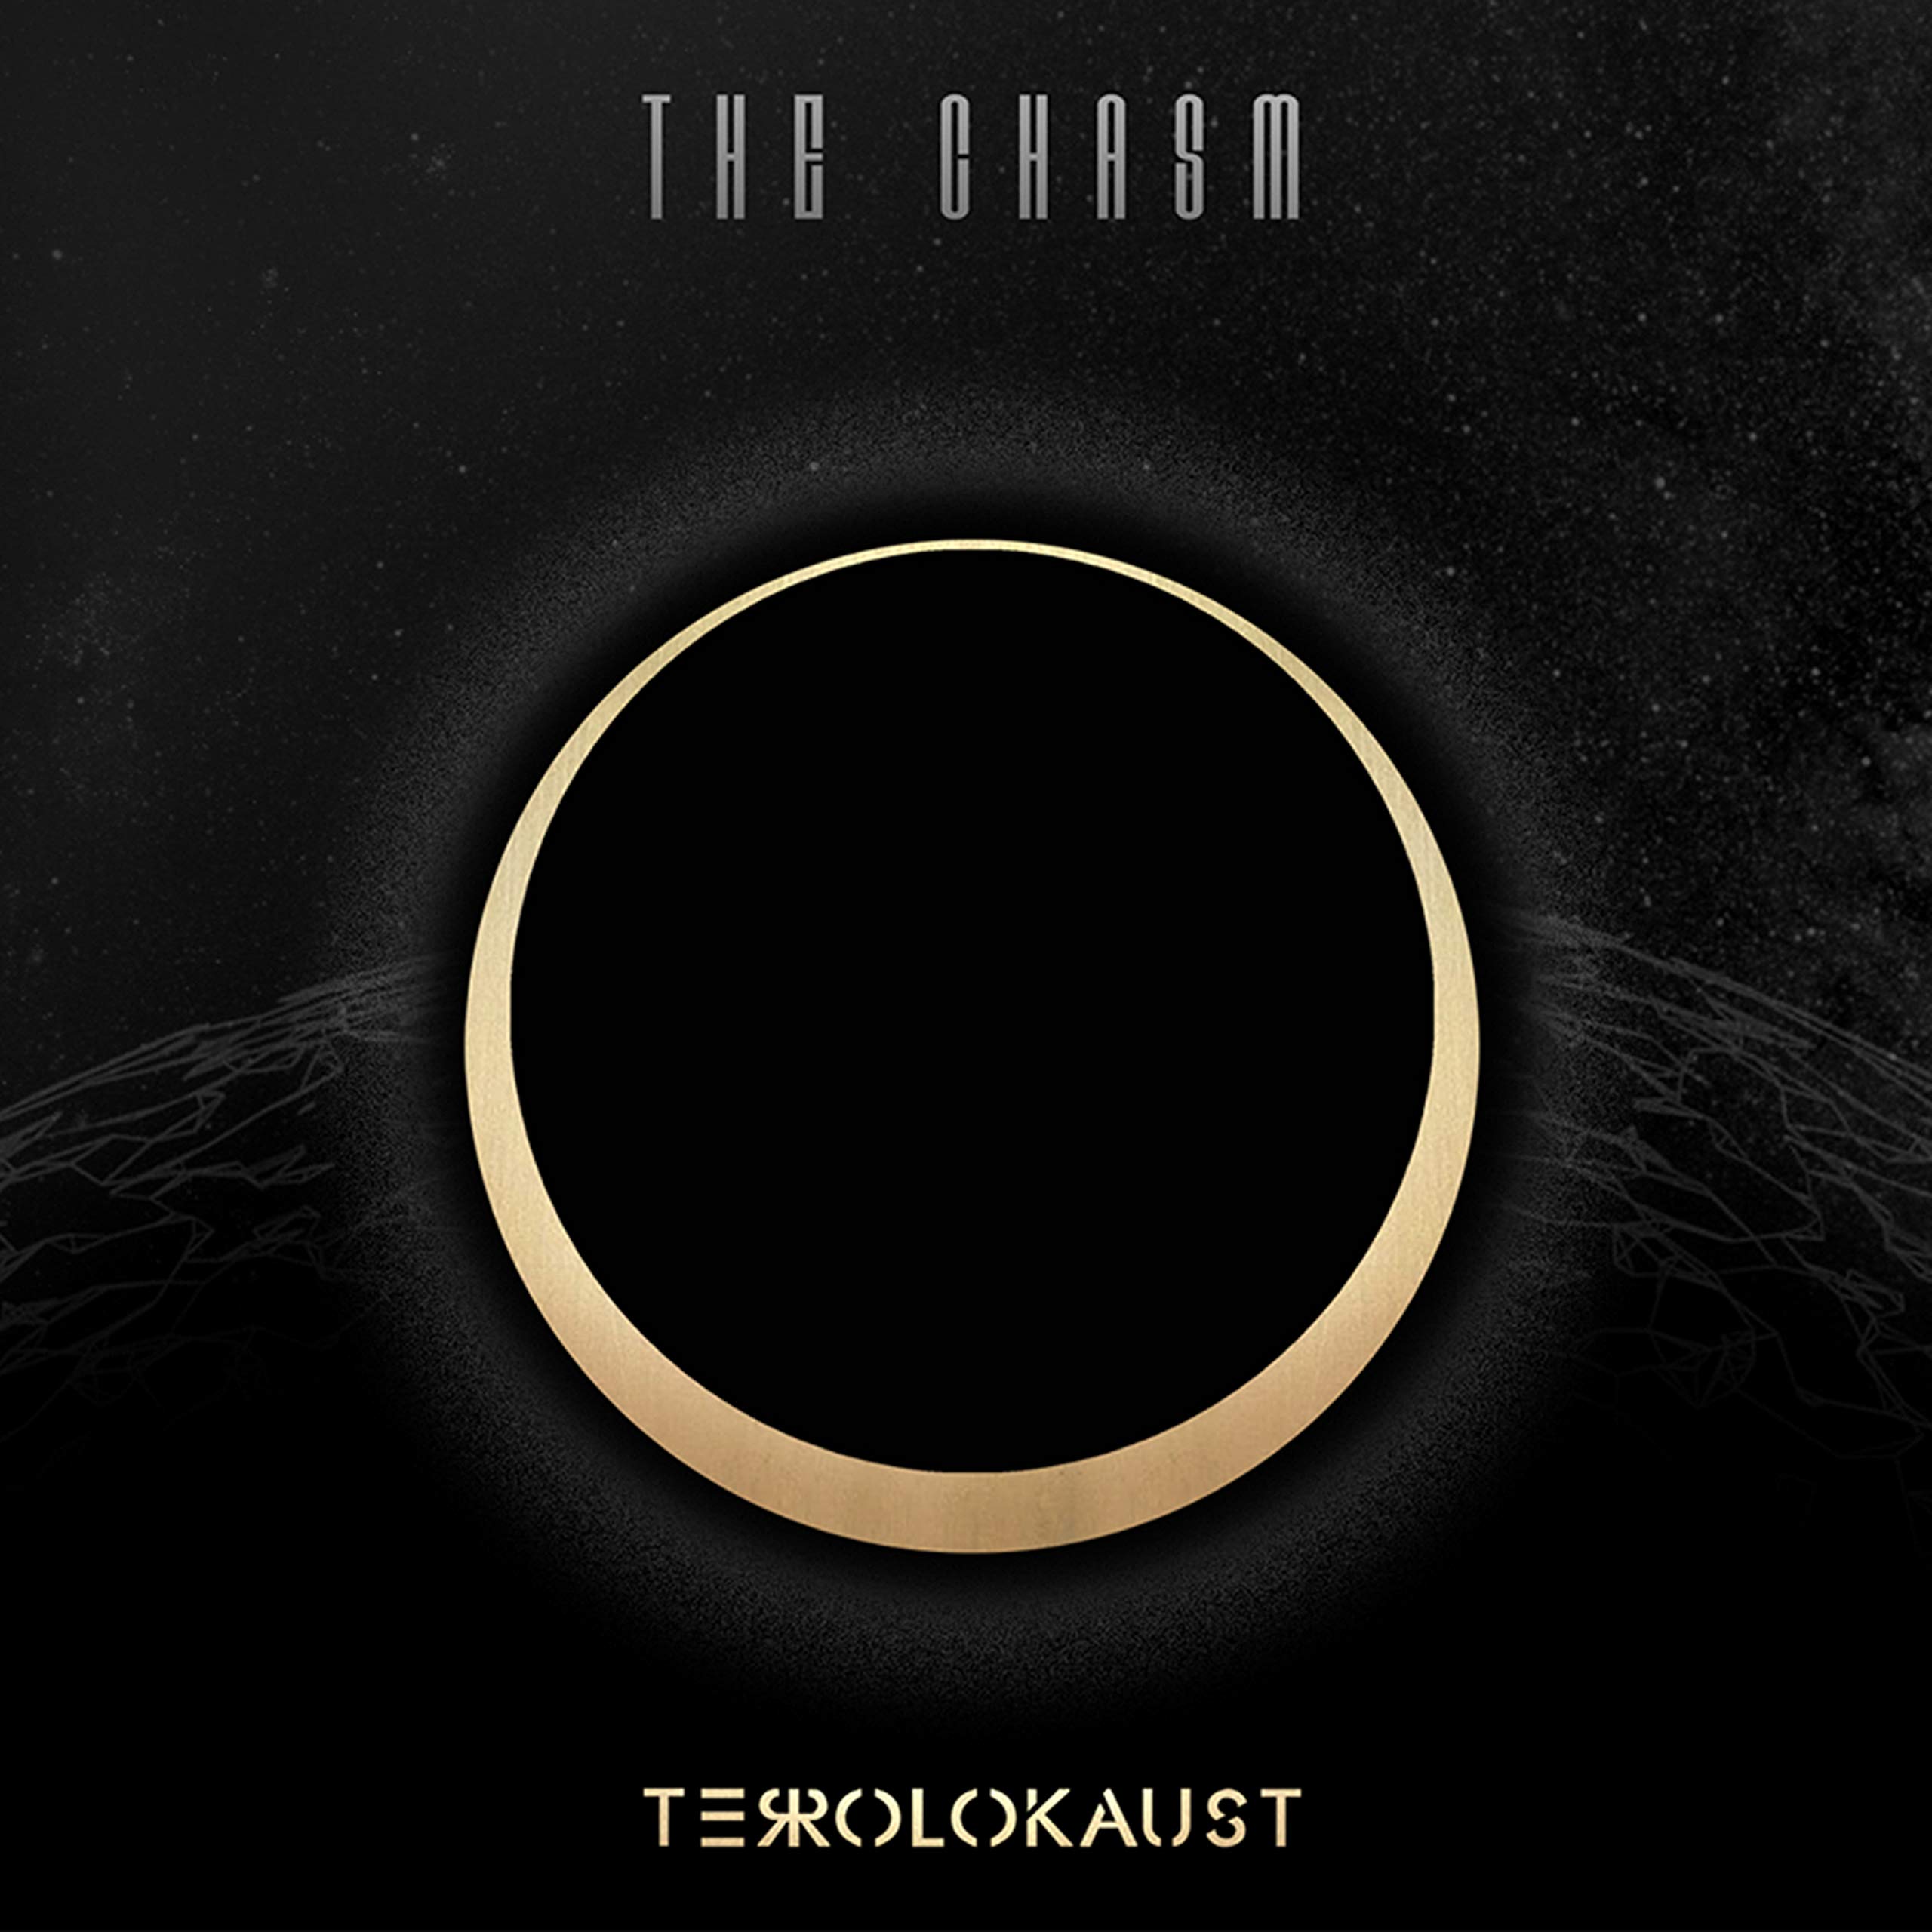 Terrolokaust-The Chasm-Limited Edition-2CD-FLAC-2019-FWYH Download